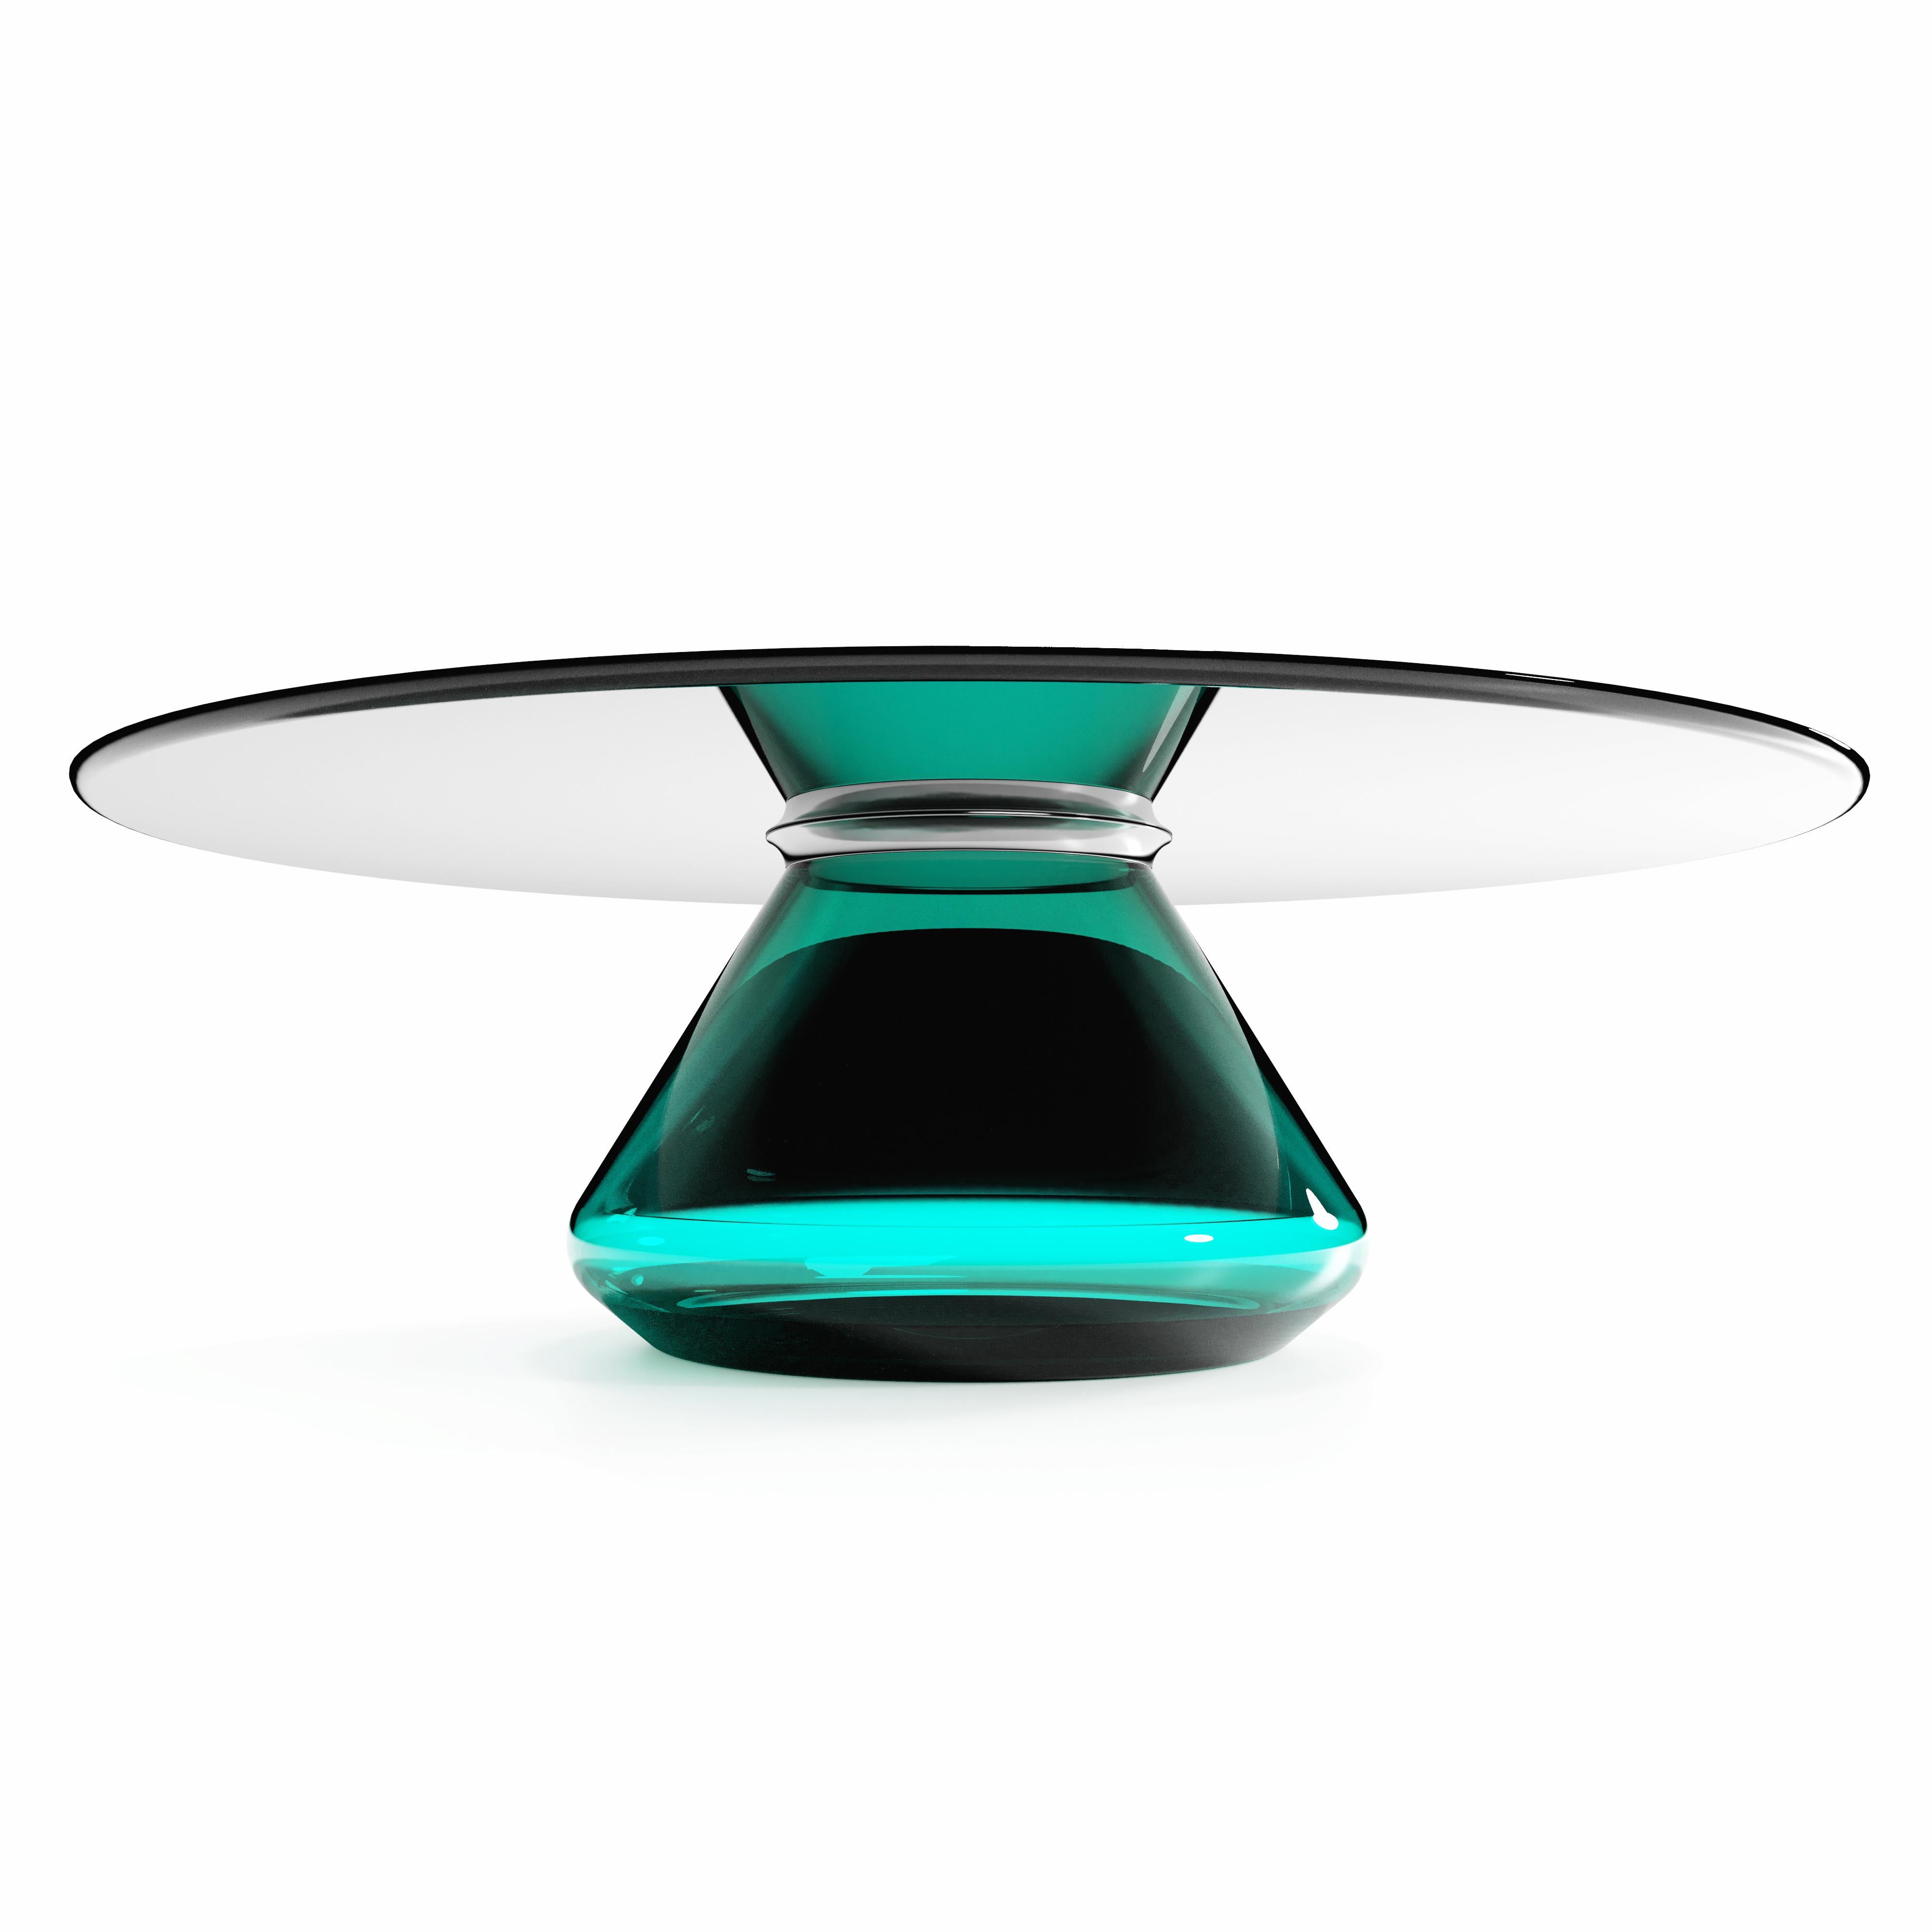 The Emerald Eclipse II coffee table by Grzegorz Majka.
Limited Edition of 8
Dimensions: 40 x 40 x 12.40 in
Materials: Glass

The total eclipse of every interior? With this amazing table everything is possible as with its Minimalist style it